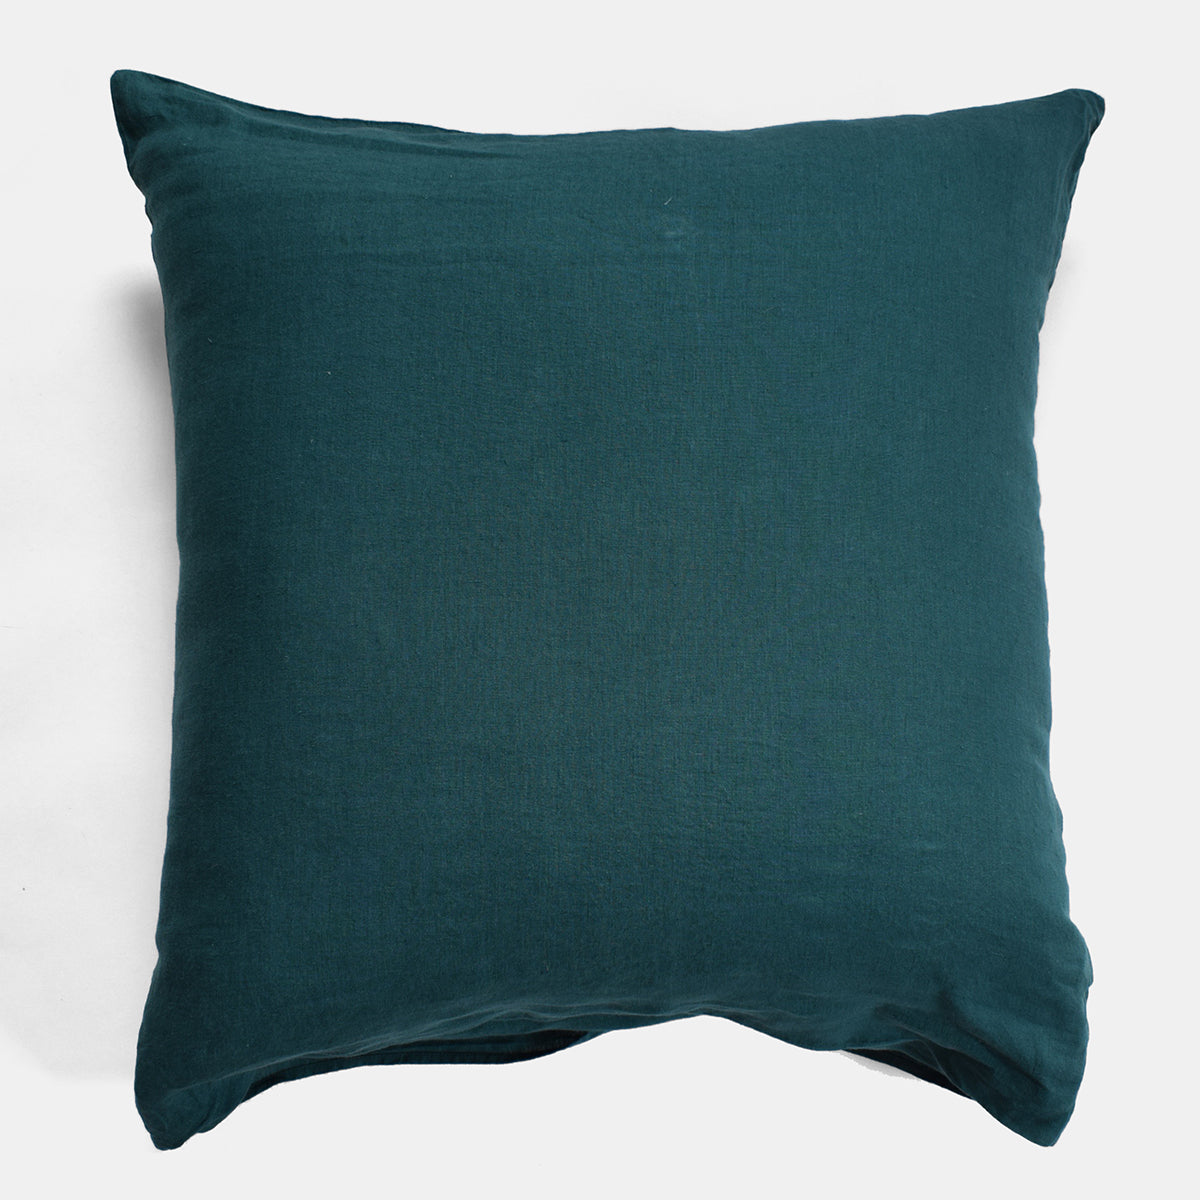 Linge Particulier Vintage Green Euro Linen Pillowcase Sham for a colorful linen bedding look in deep teal green - Collyer&#39;s Mansion